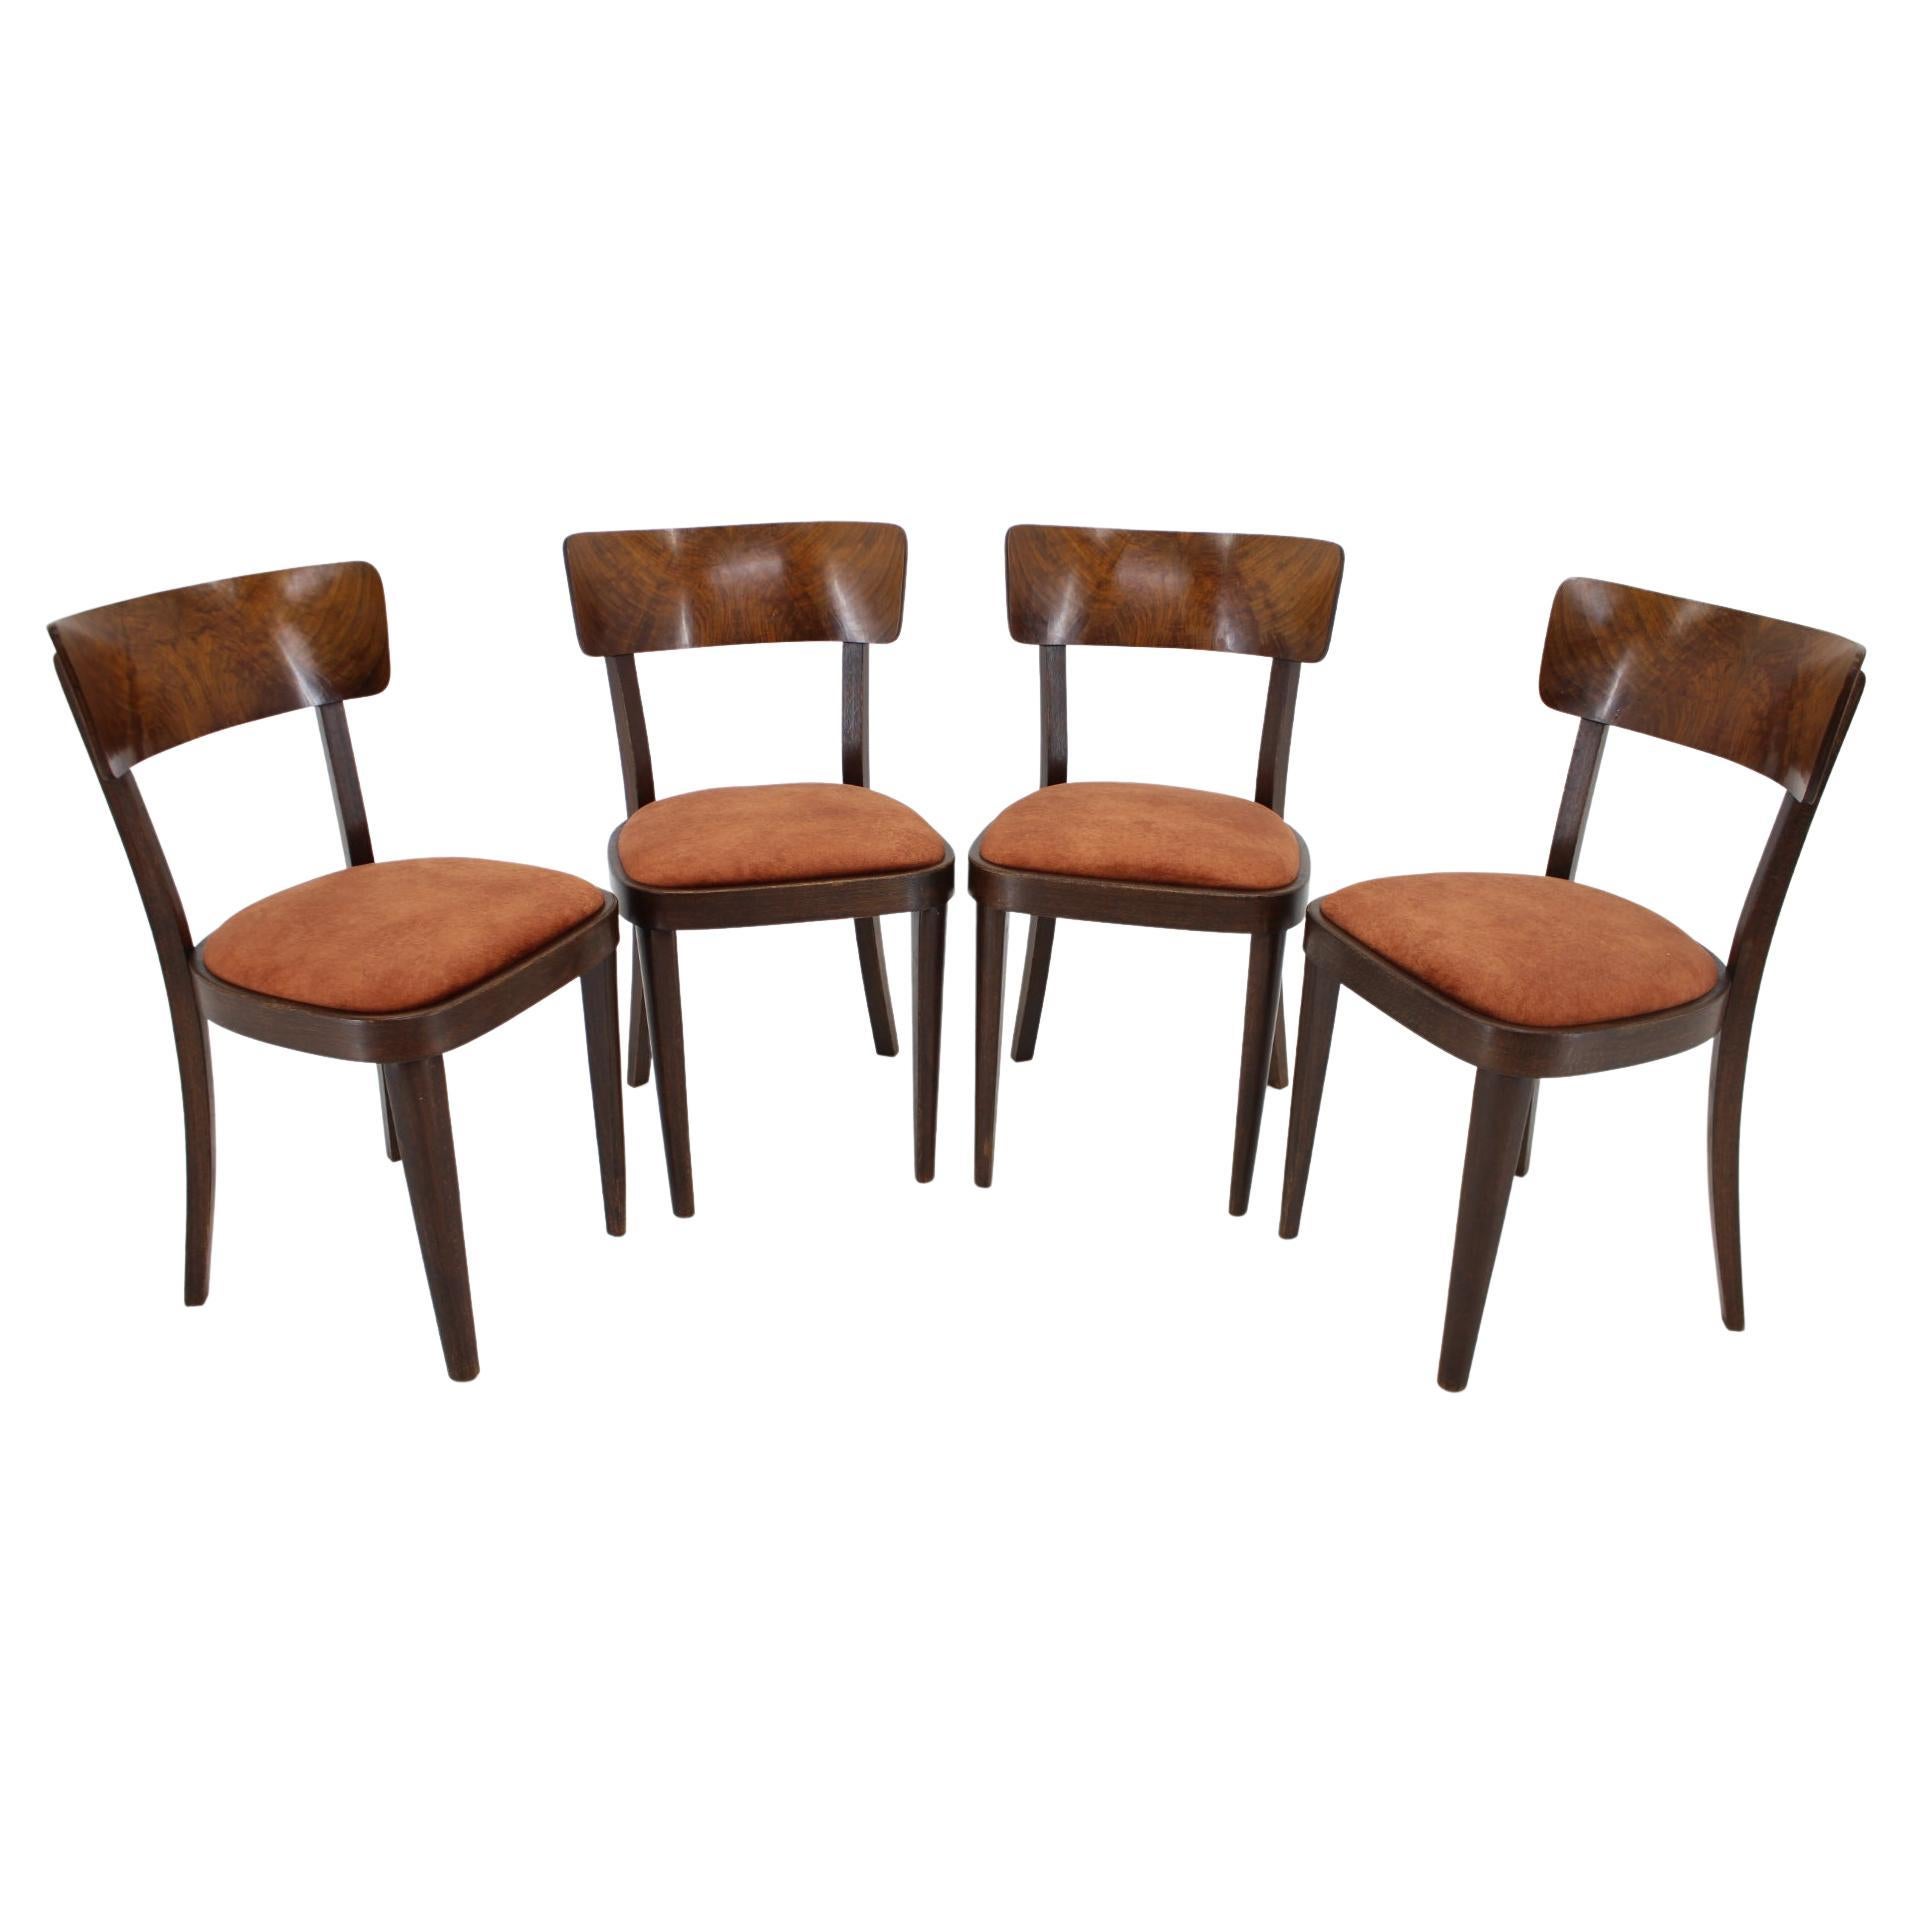 1940s Set of Four Dining Chairs, Czechoslovakia For Sale